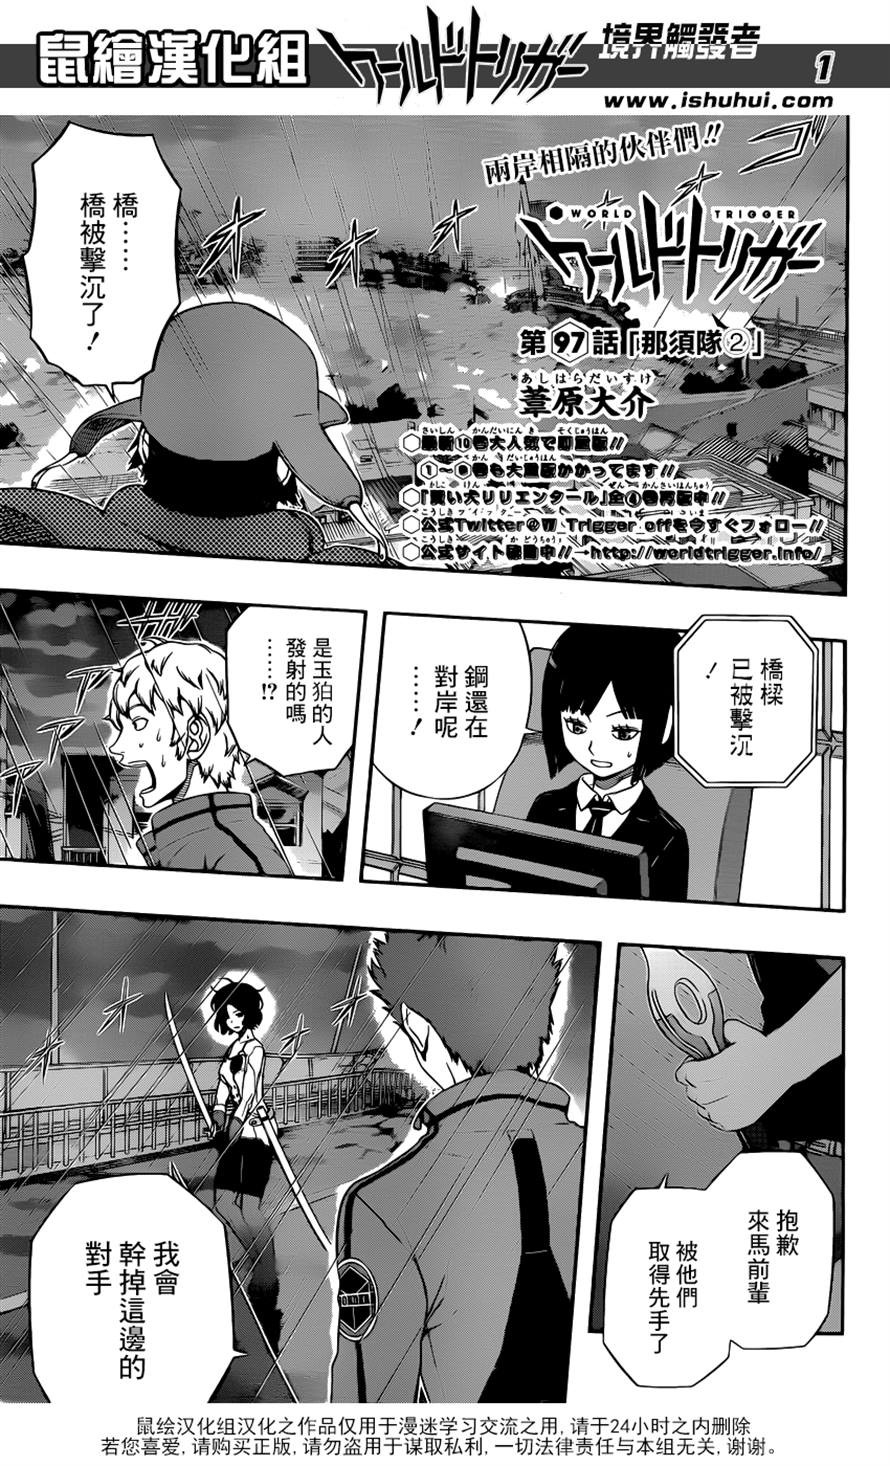 World Trigger - Chapter 97 - Page 1